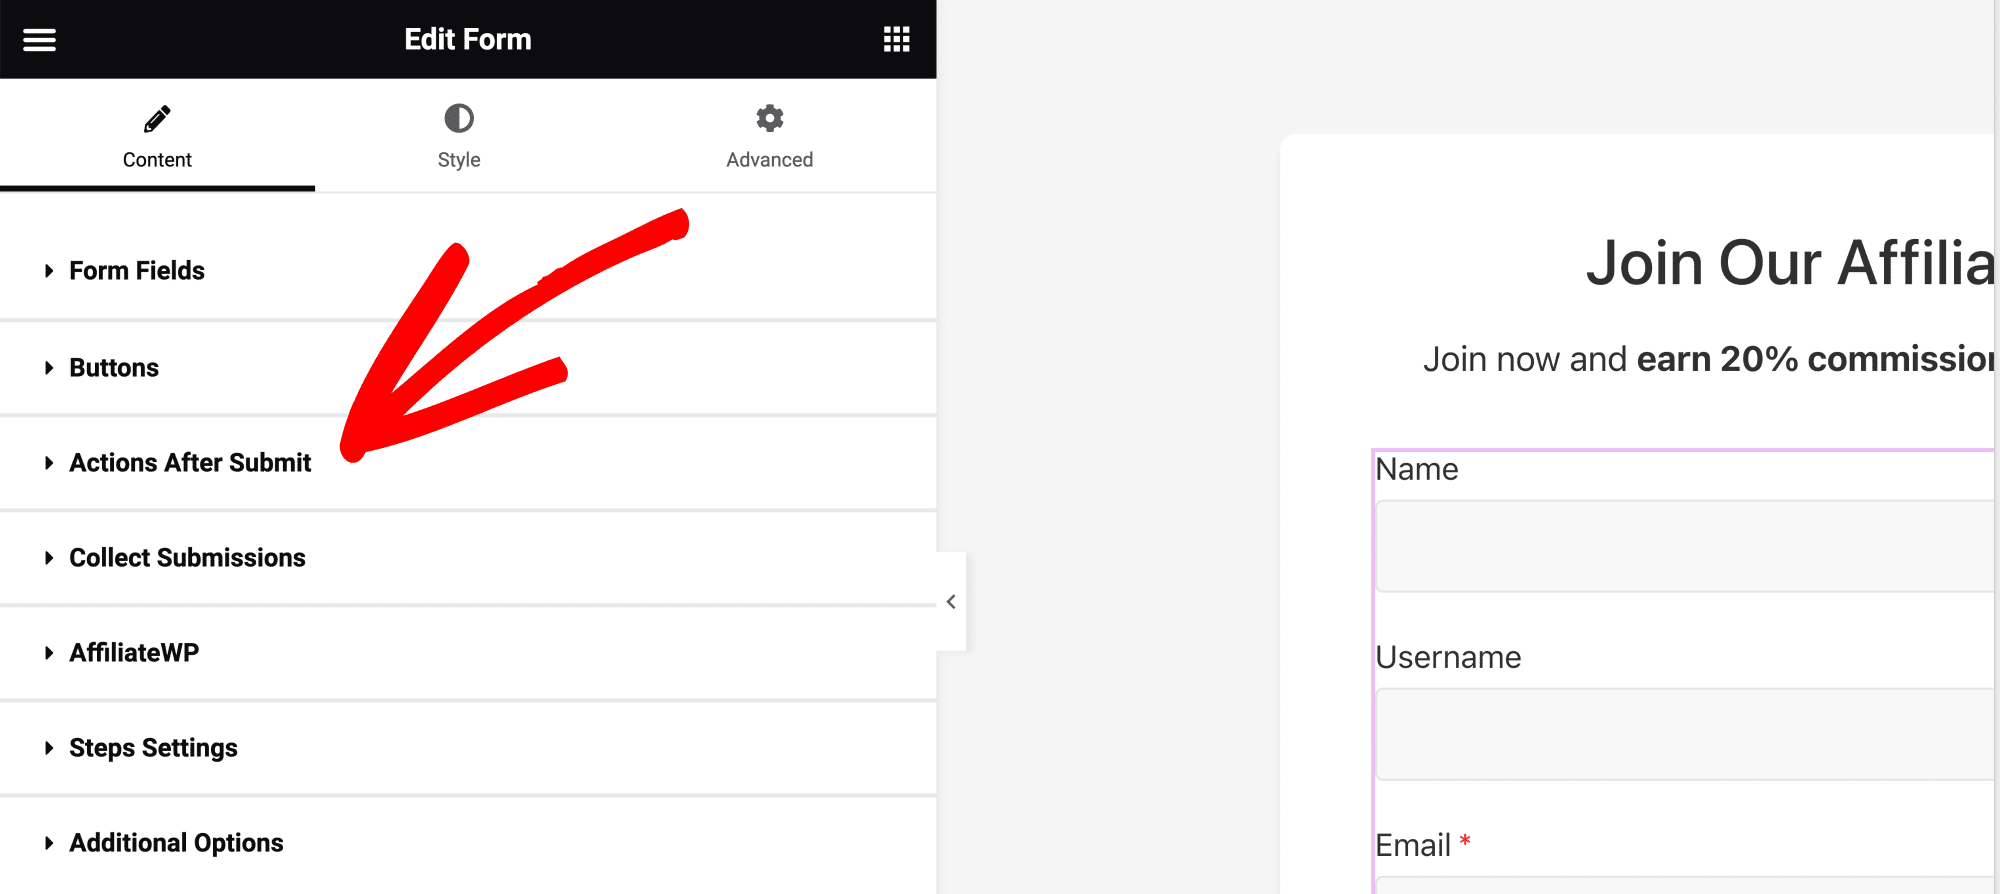 The Form widget's Actions After Submit section